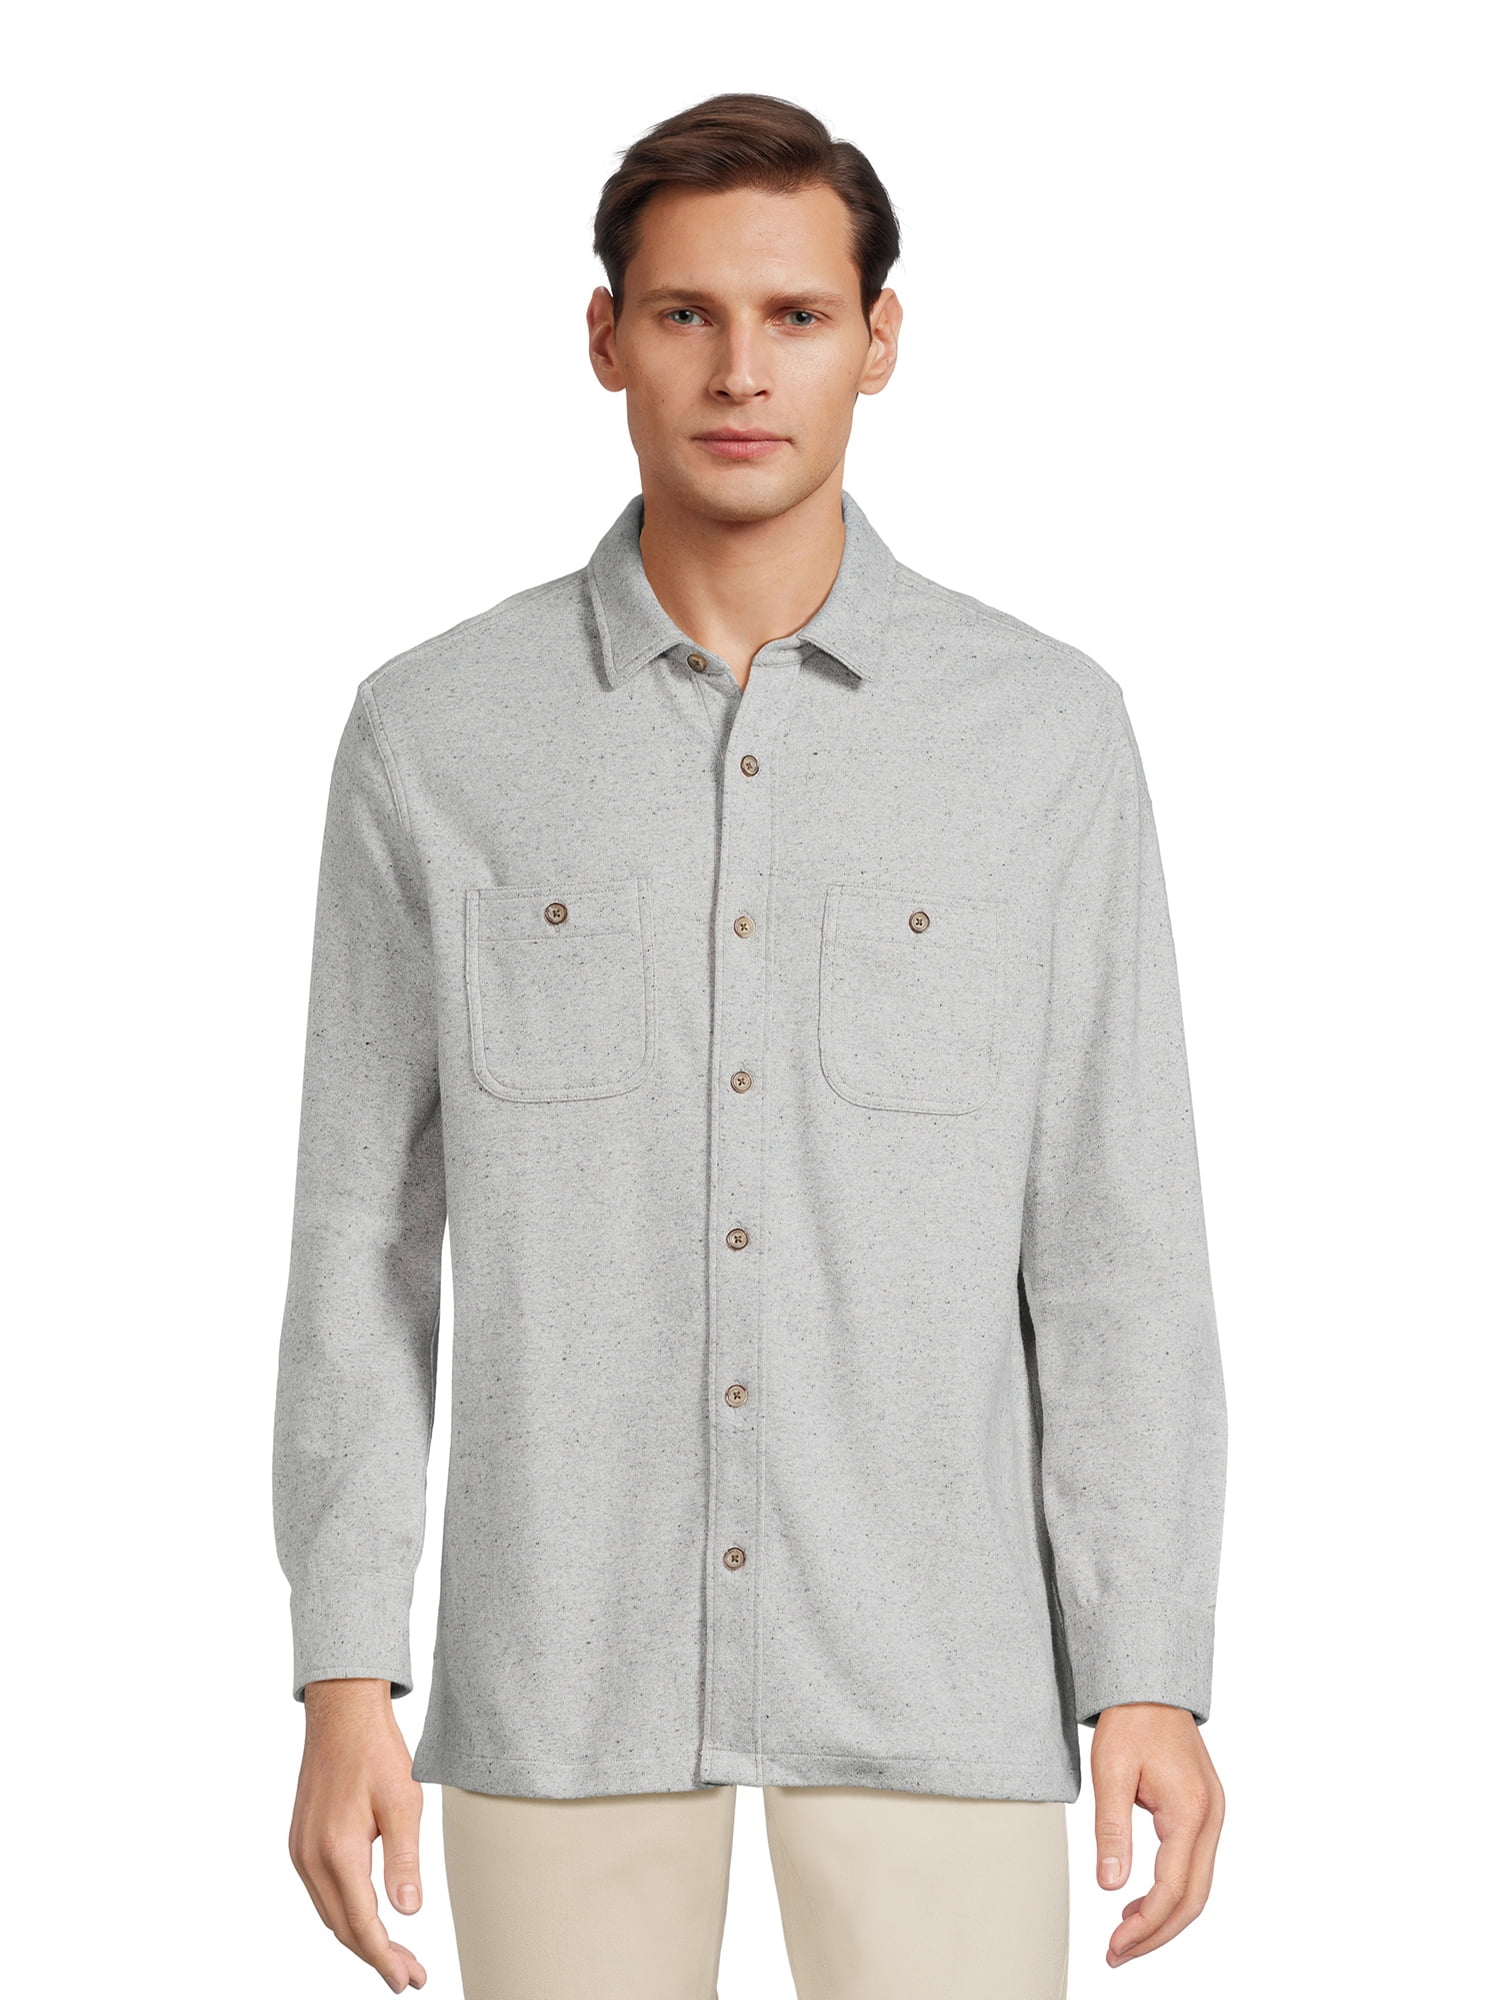 George Men's Long Sleeve Over Shirt, Sizes S-3XL